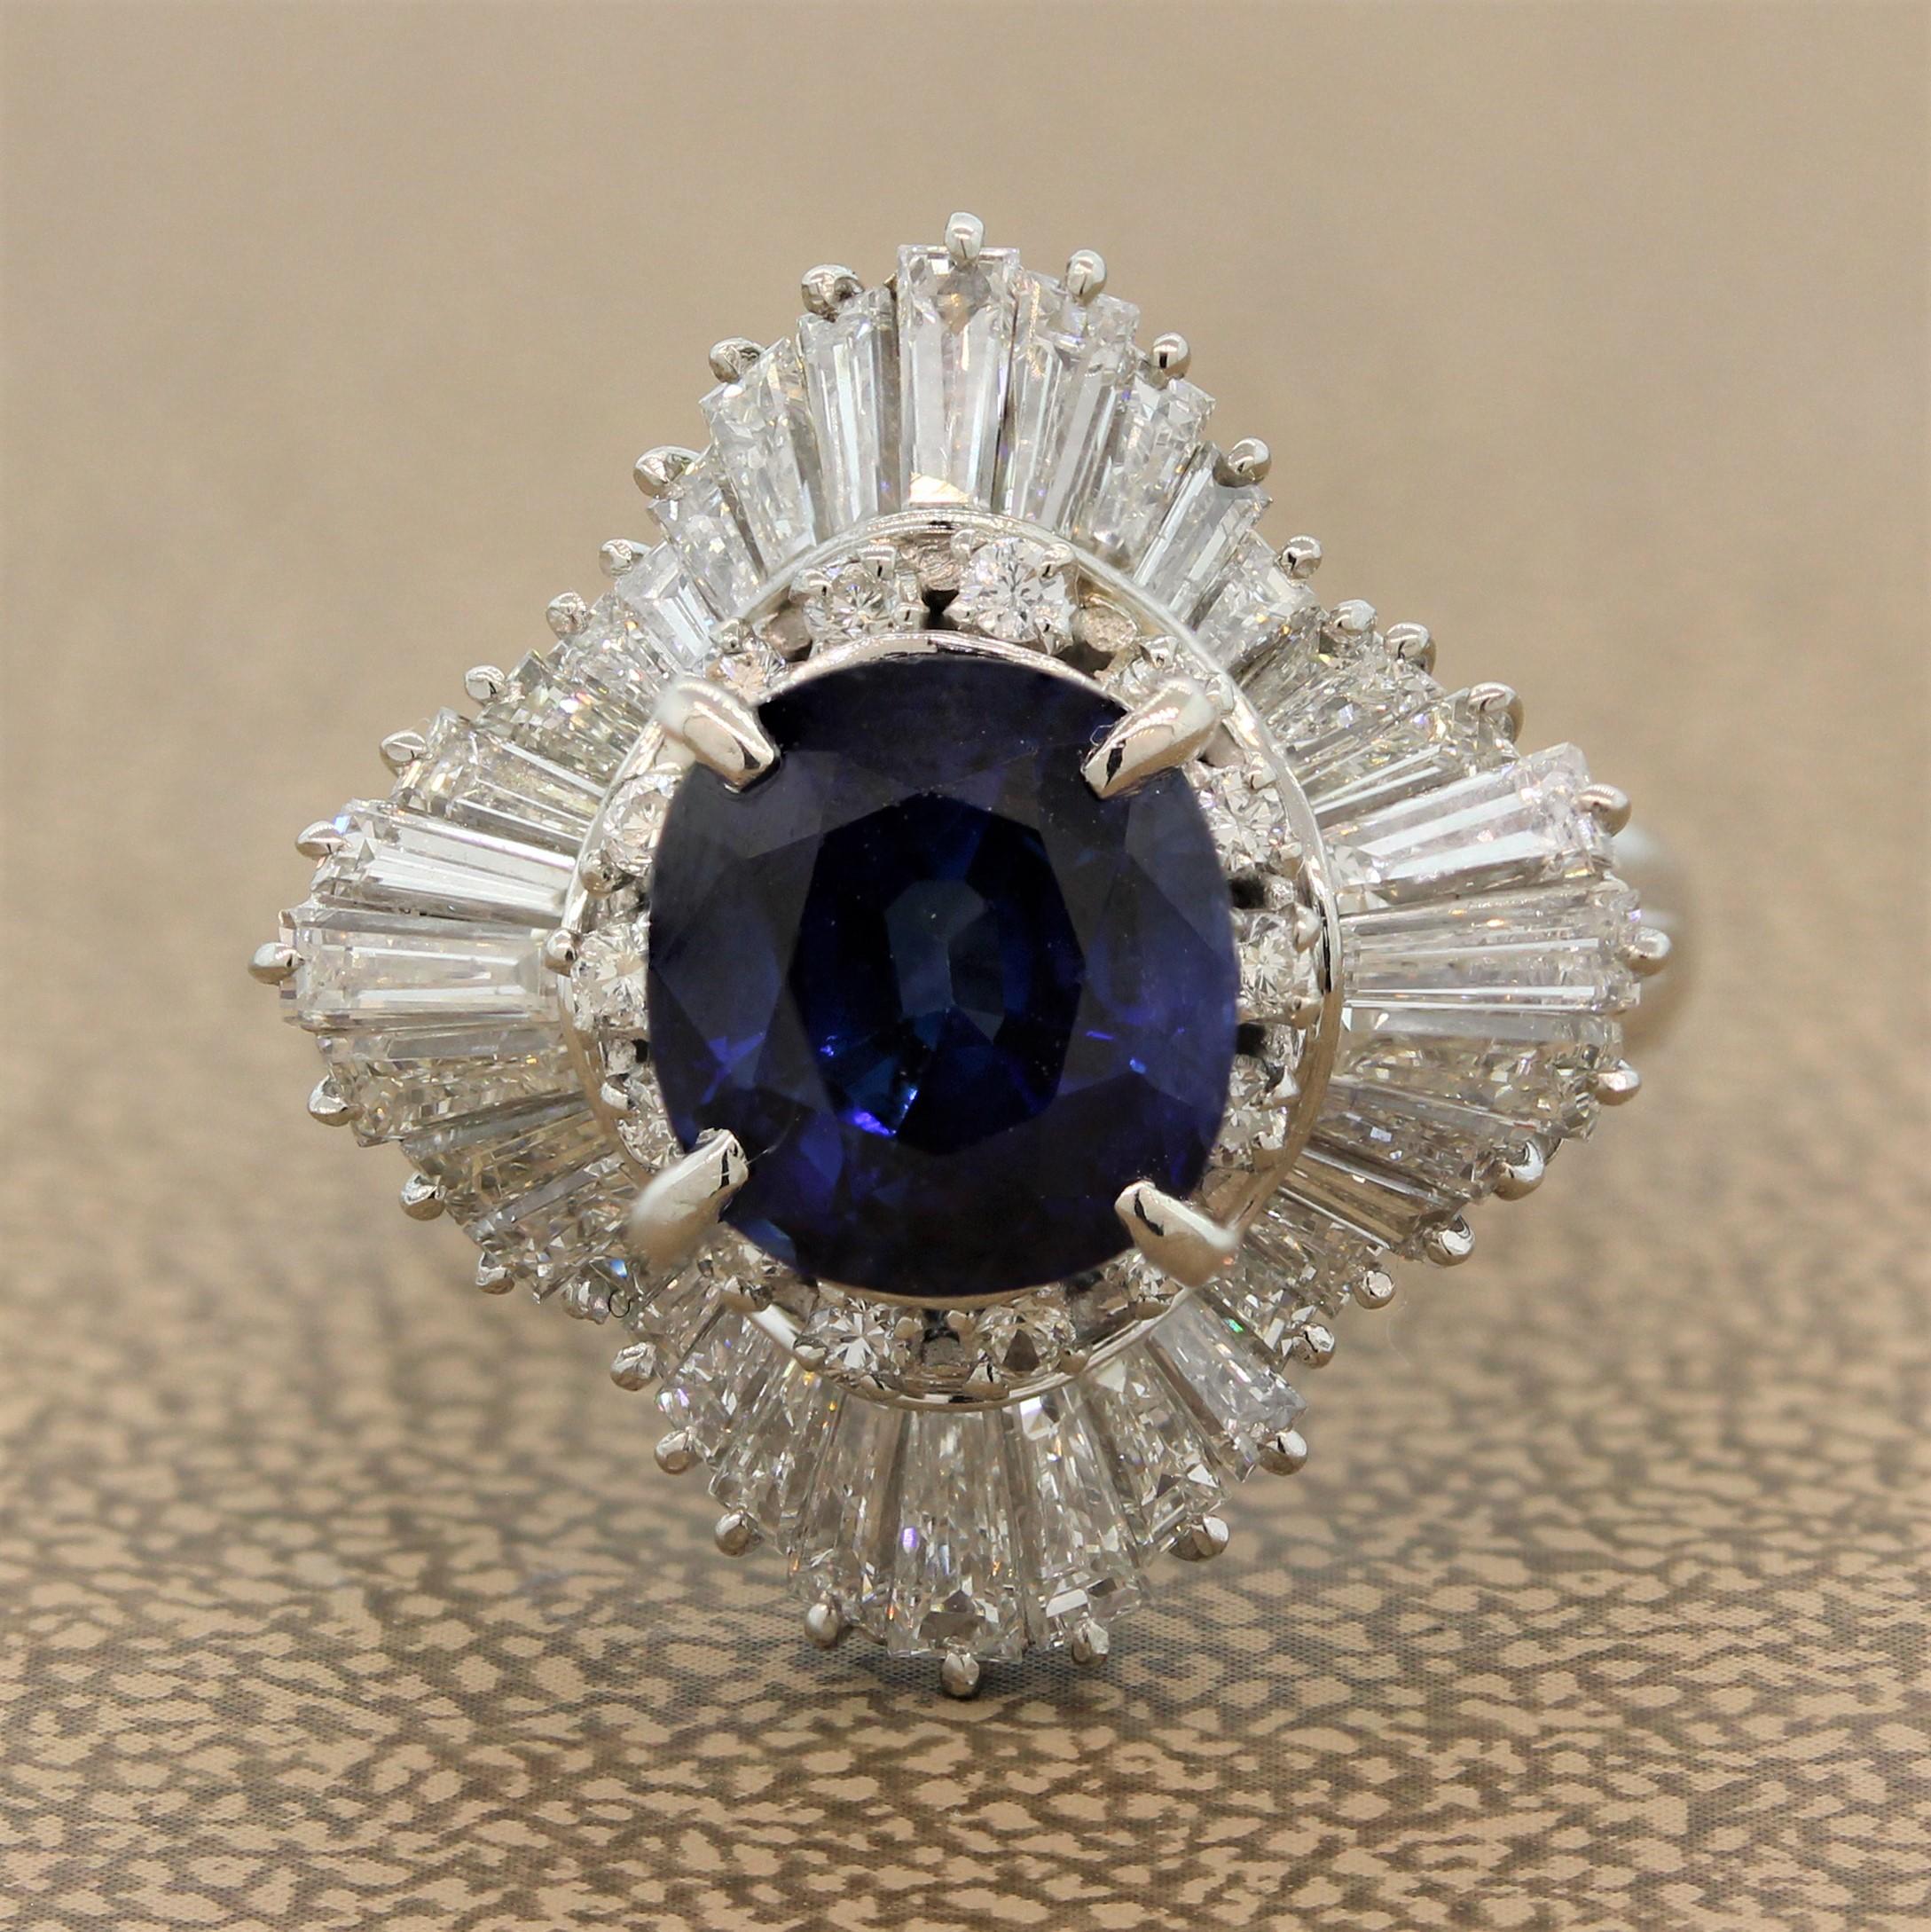 A delicate ballerina ring featuring a 3.14 carat blue sapphire which shows a vivid blue color. The cushion shaped sapphire has a double halo of tapered baguette and round cut diamonds weighting 1.80 carats which are set in a hand fabricated platinum